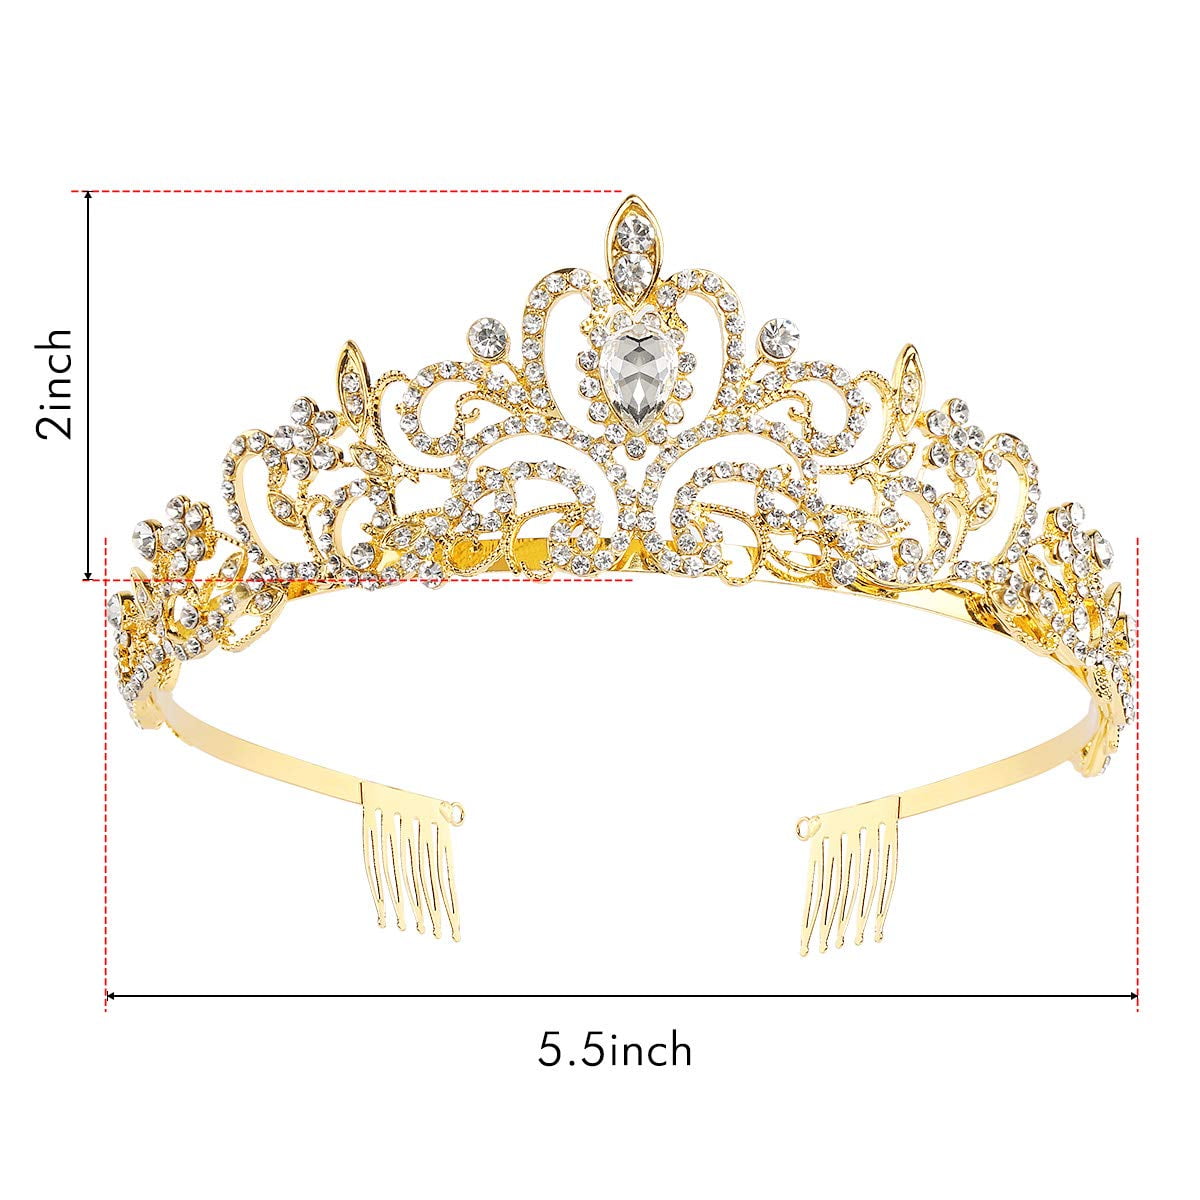 Details about   Rhinestone Crystal Big Crown Hair Jewelry Accessories For Wedding Beauty Pageant